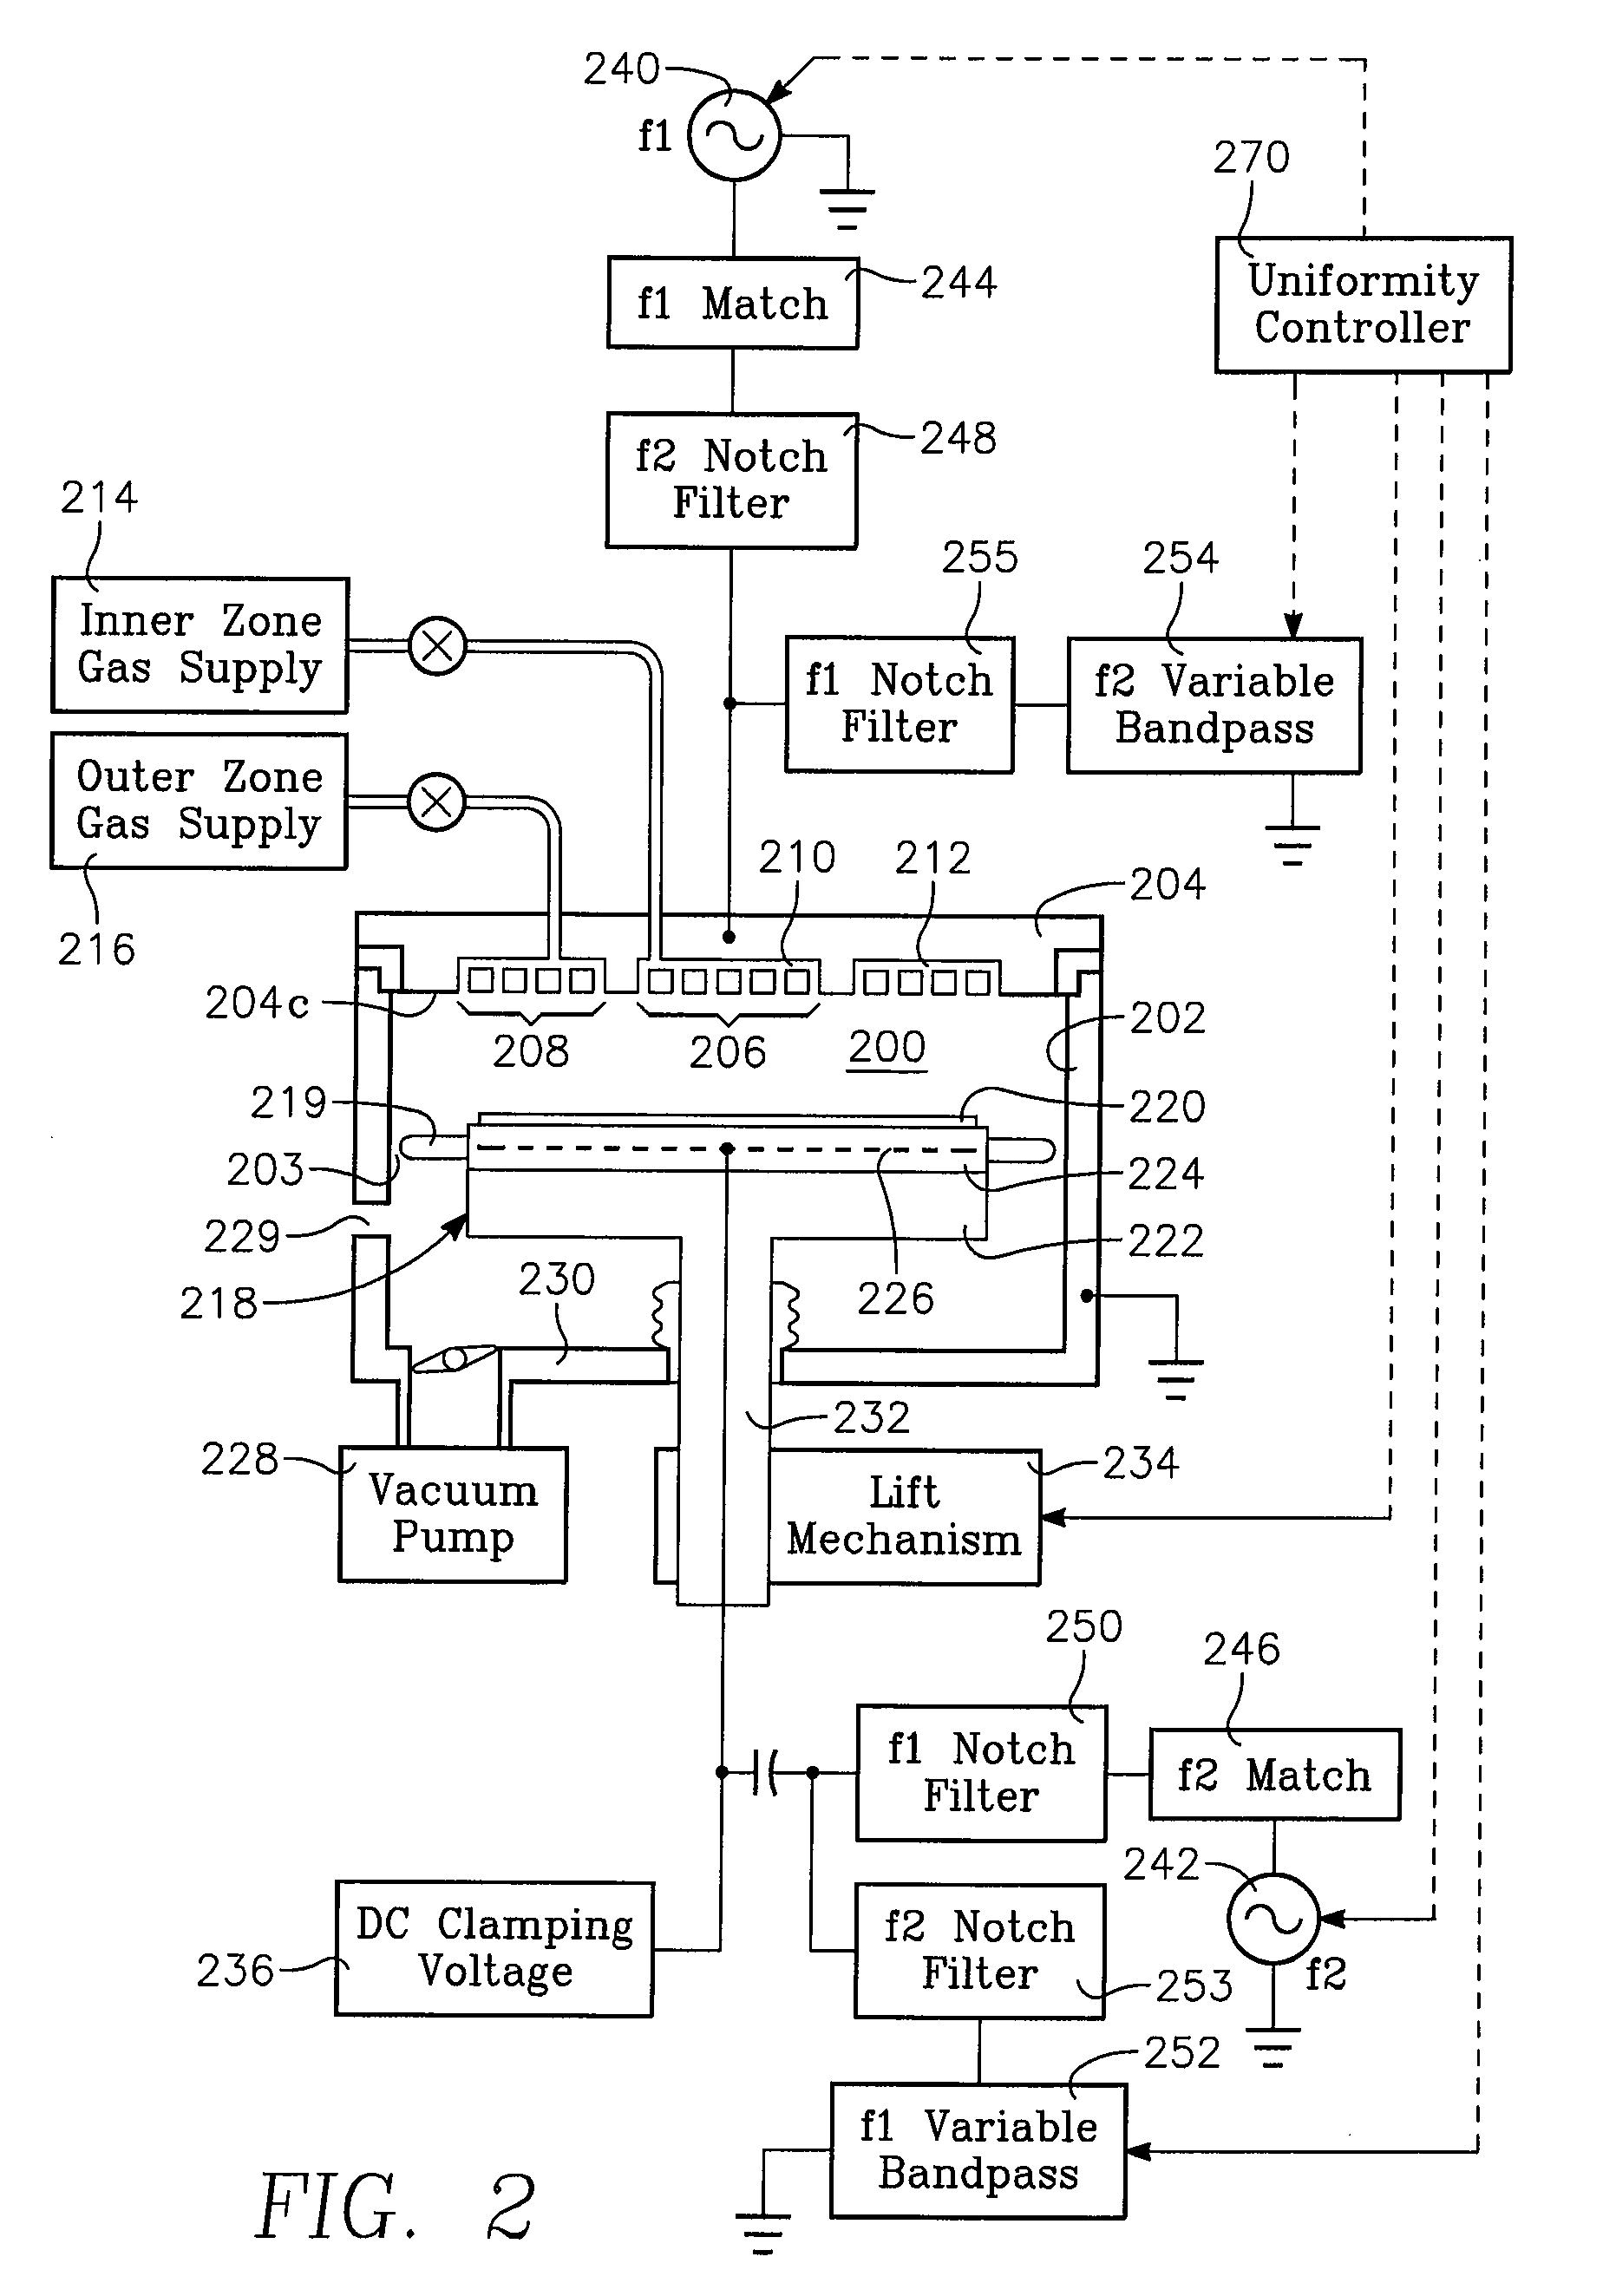 Method of processing a workpiece in a plasma reactor with variable height ground return path to control plasma ion density uniformity